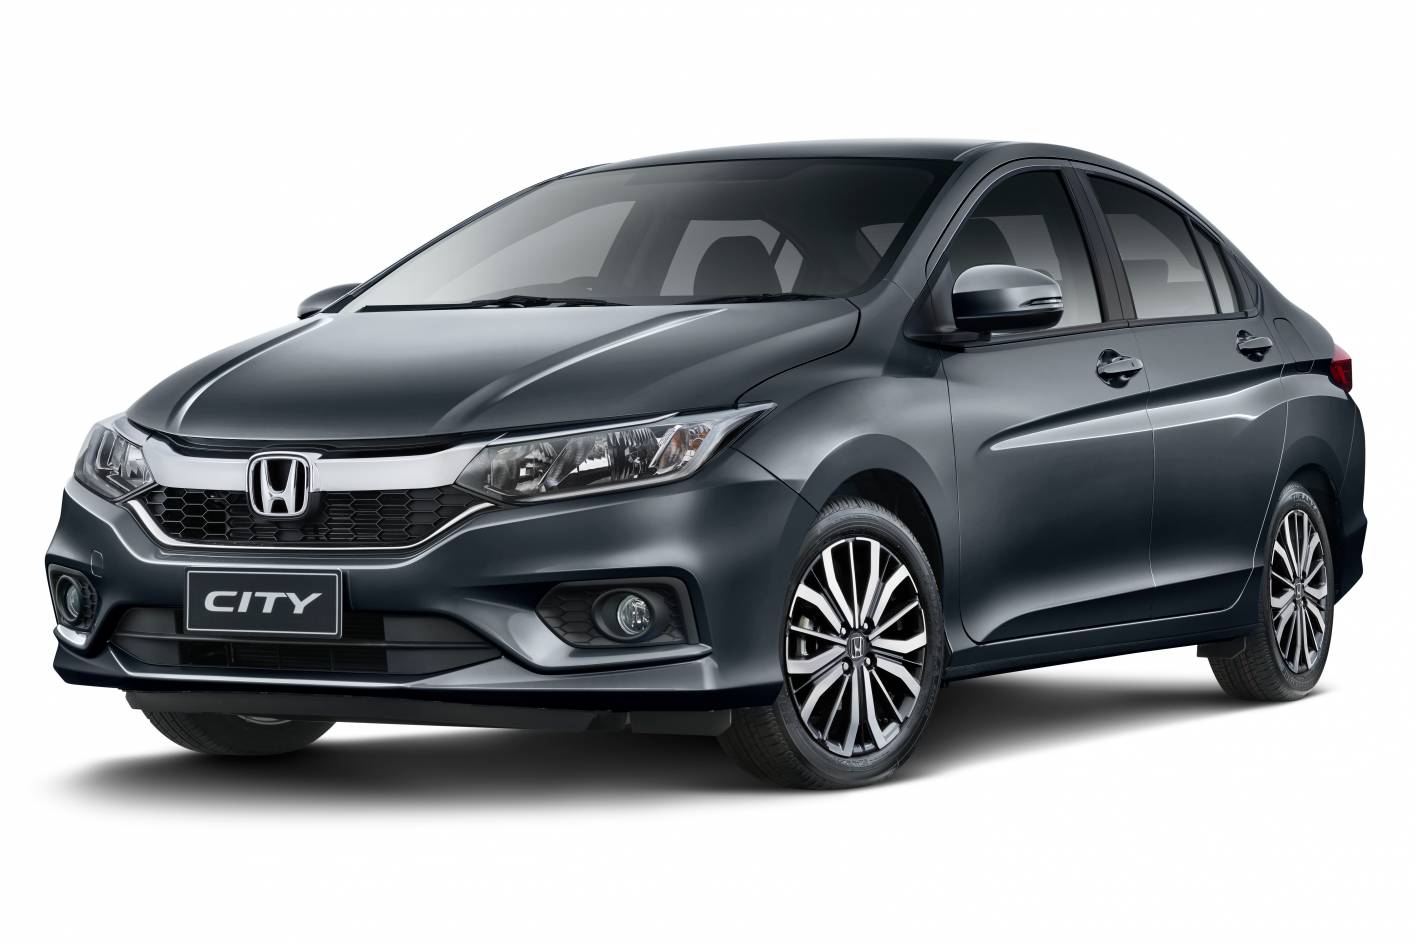 Honda City updated for 2017 with revised styling and new equipment - ForceGT.com